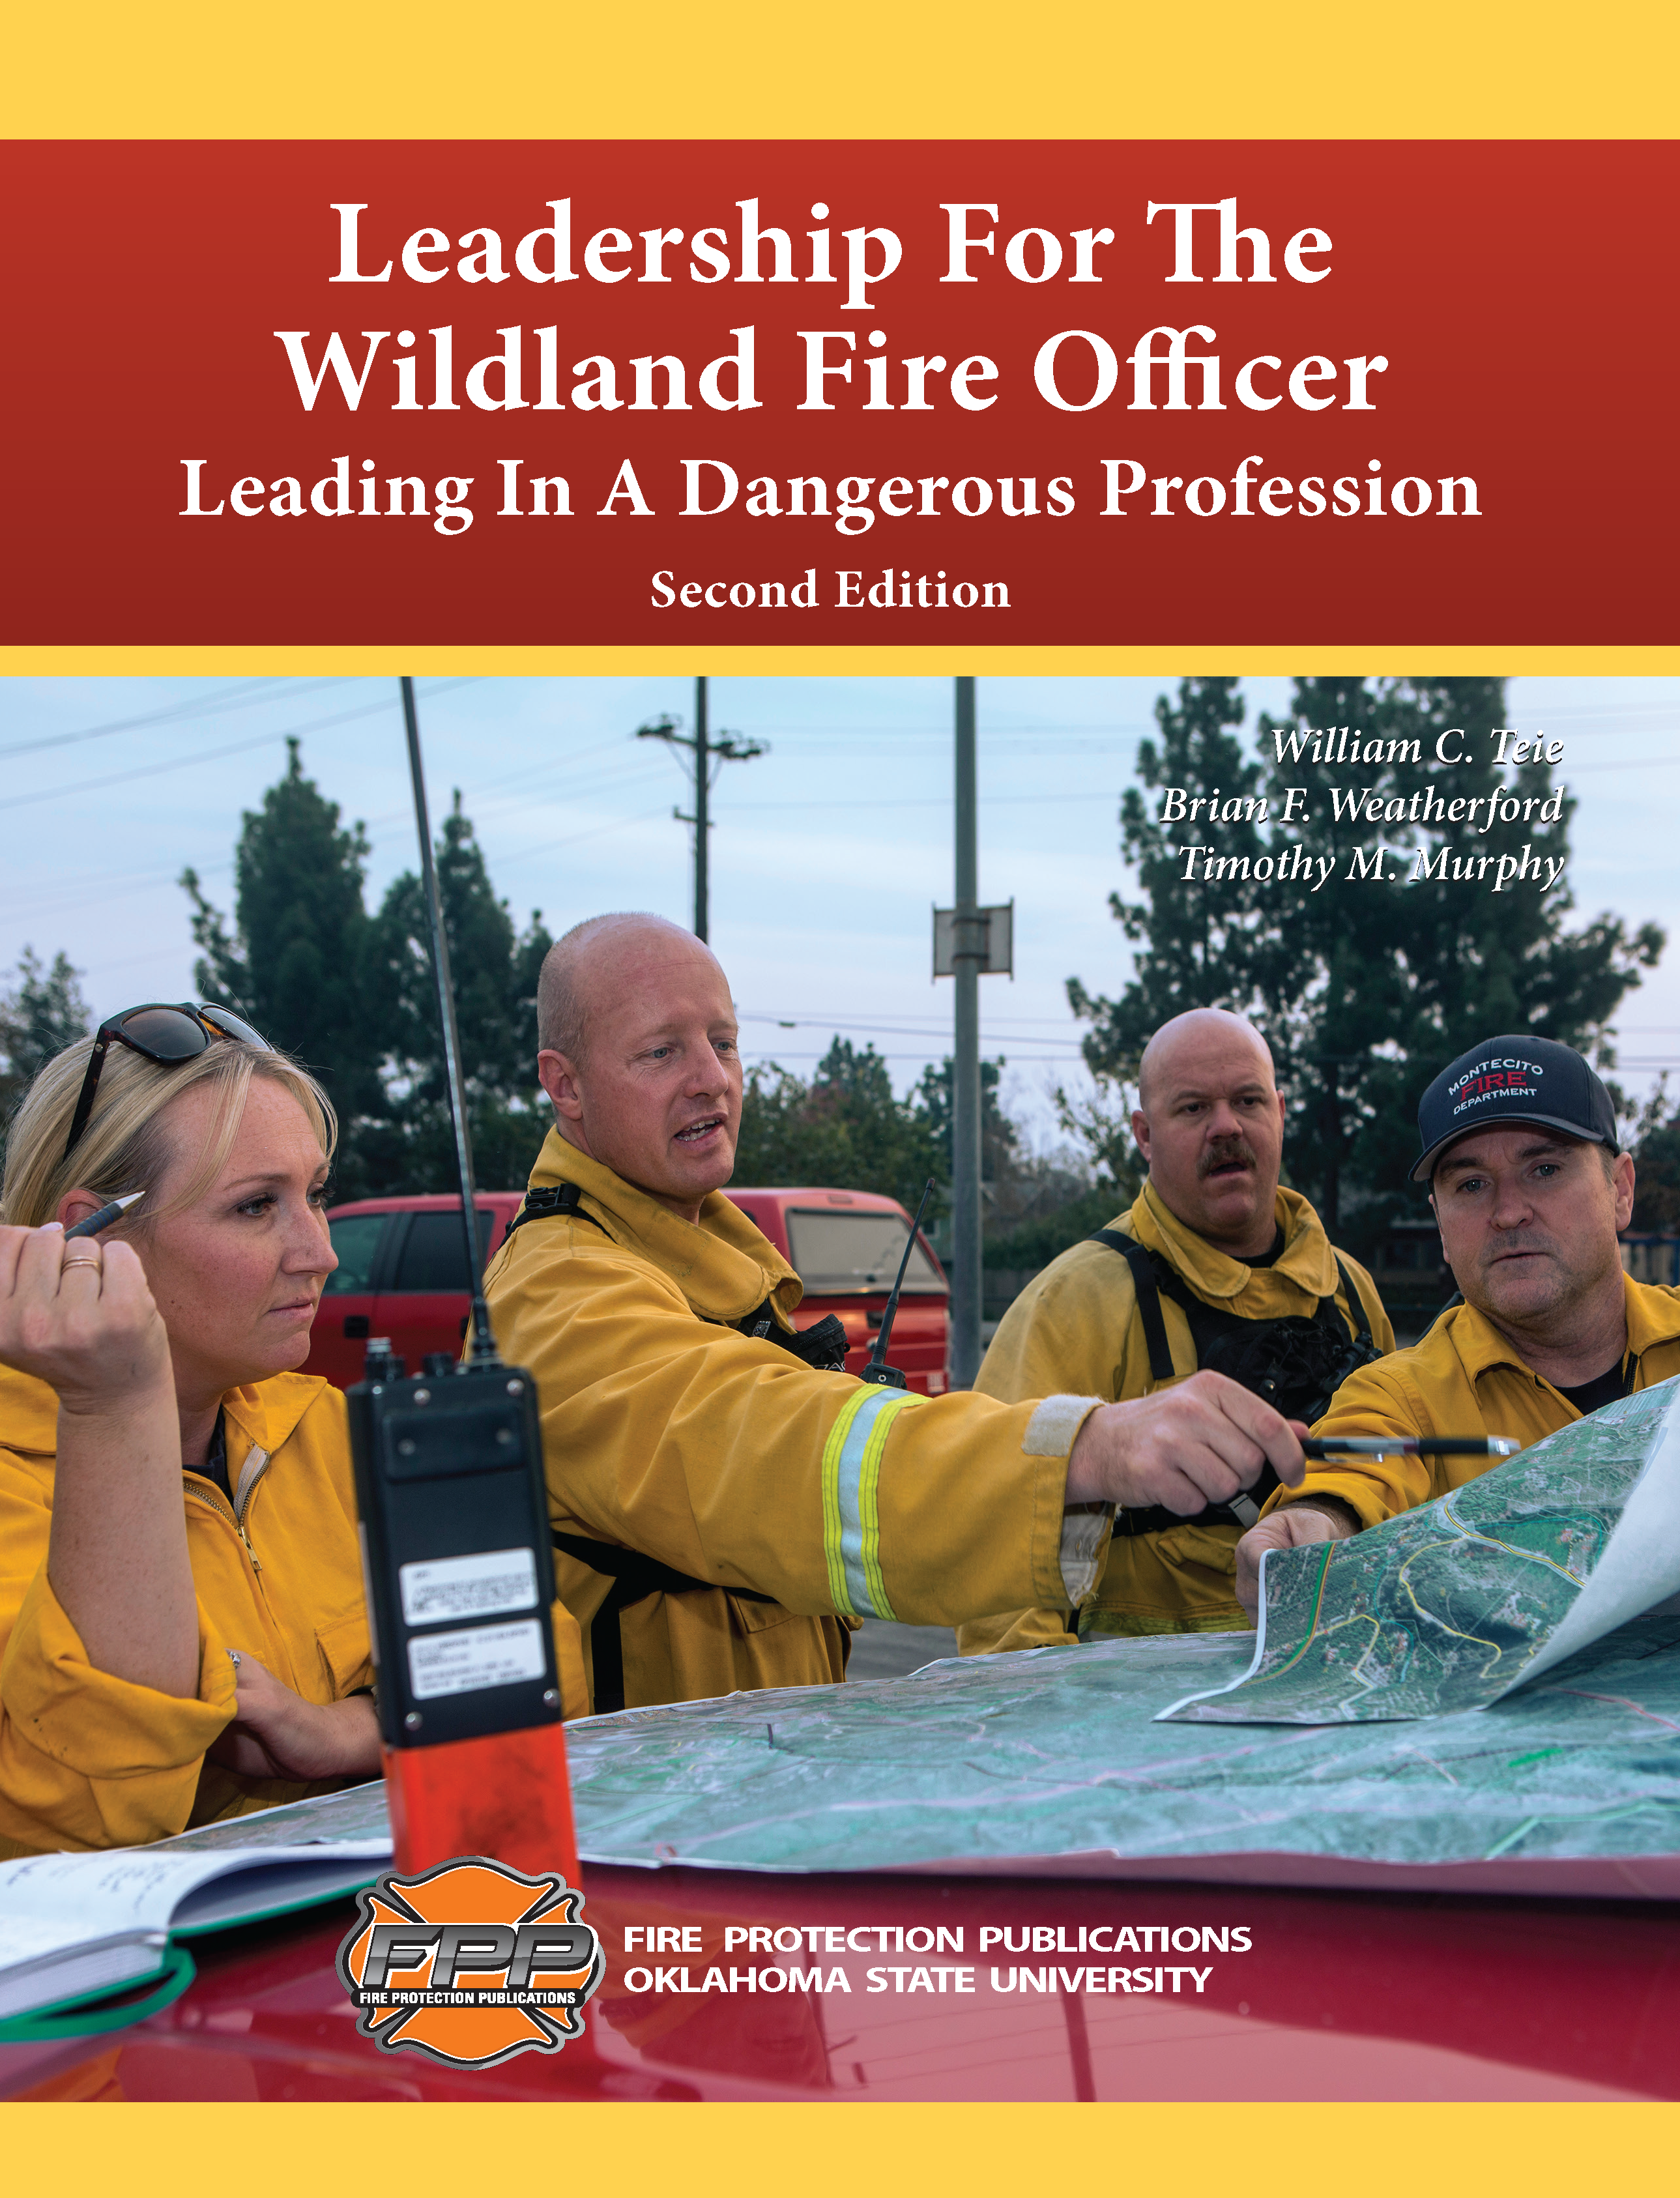 Leadership for the Wildland Fire Officer: Leading in a Dangerous Profession, 2nd Edition